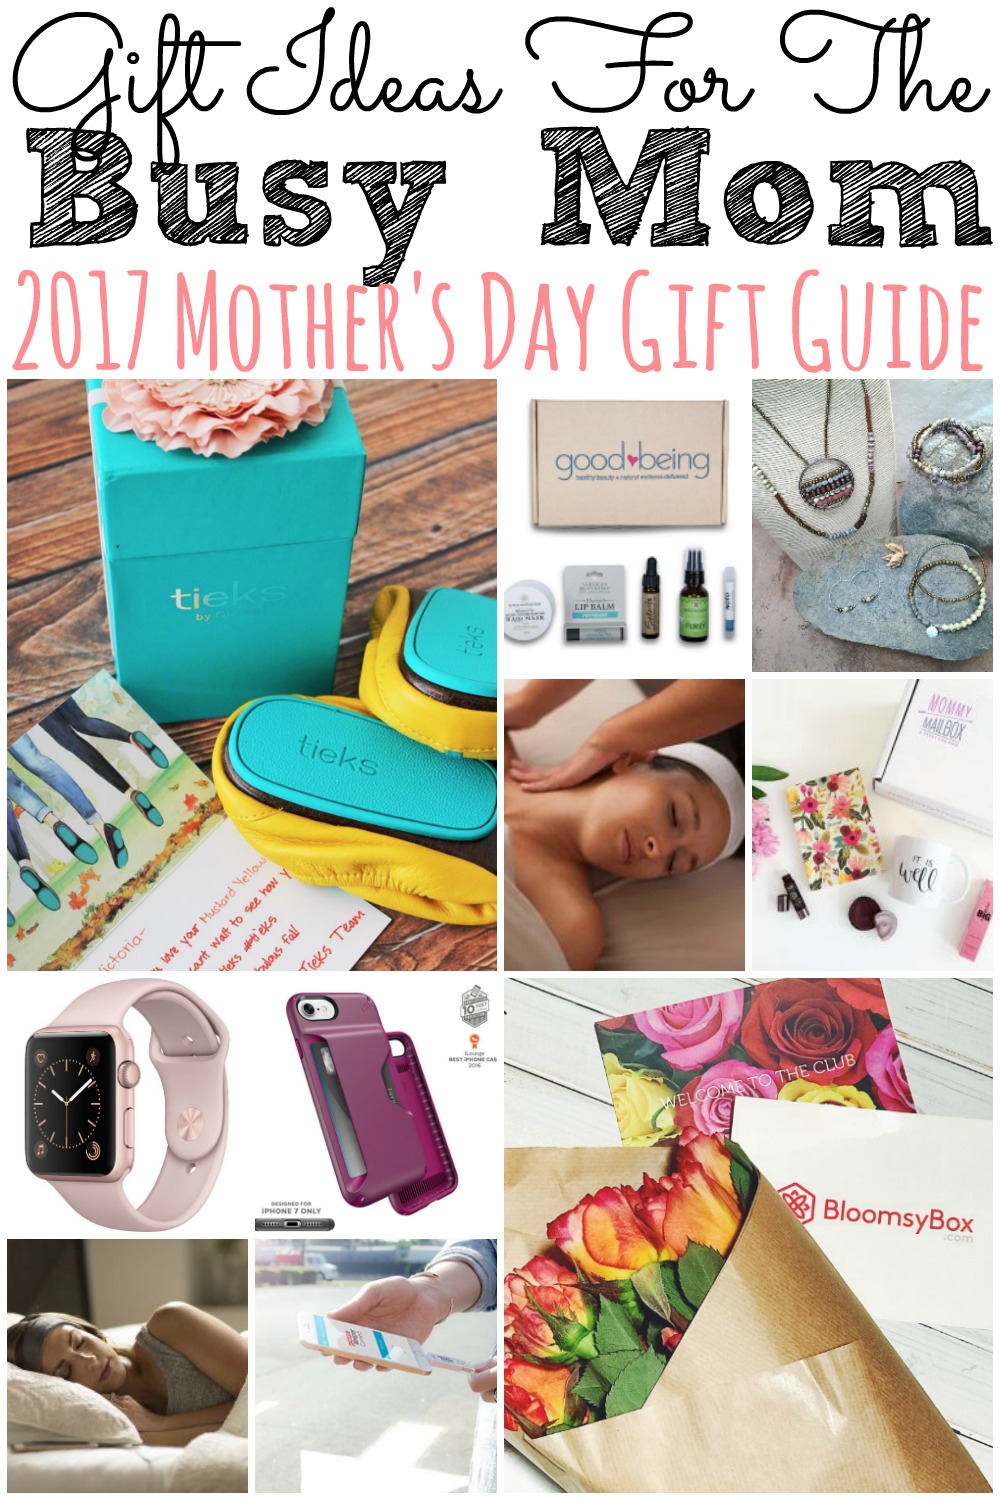 Gift Ideas For The Busy Mom: 2017 Mother's Day Gift Guide